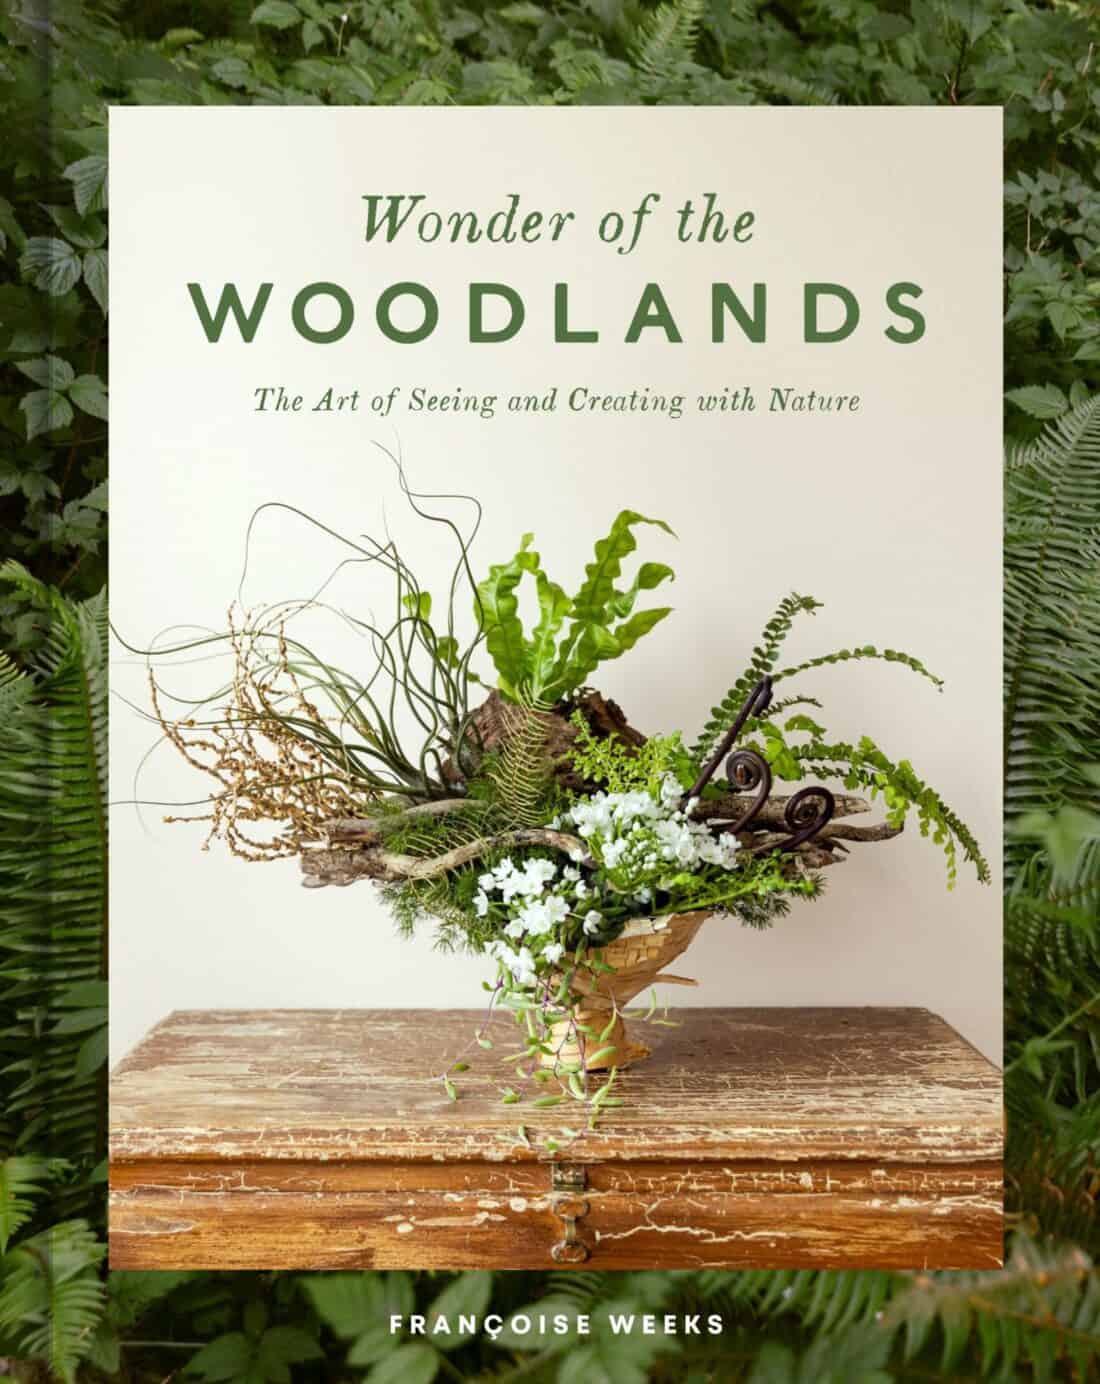 A book titled "Wonder of the Woodland Garden" by Françoise Weeks, featuring a cover with a floral arrangement on a wooden table against a greenery backdrop.